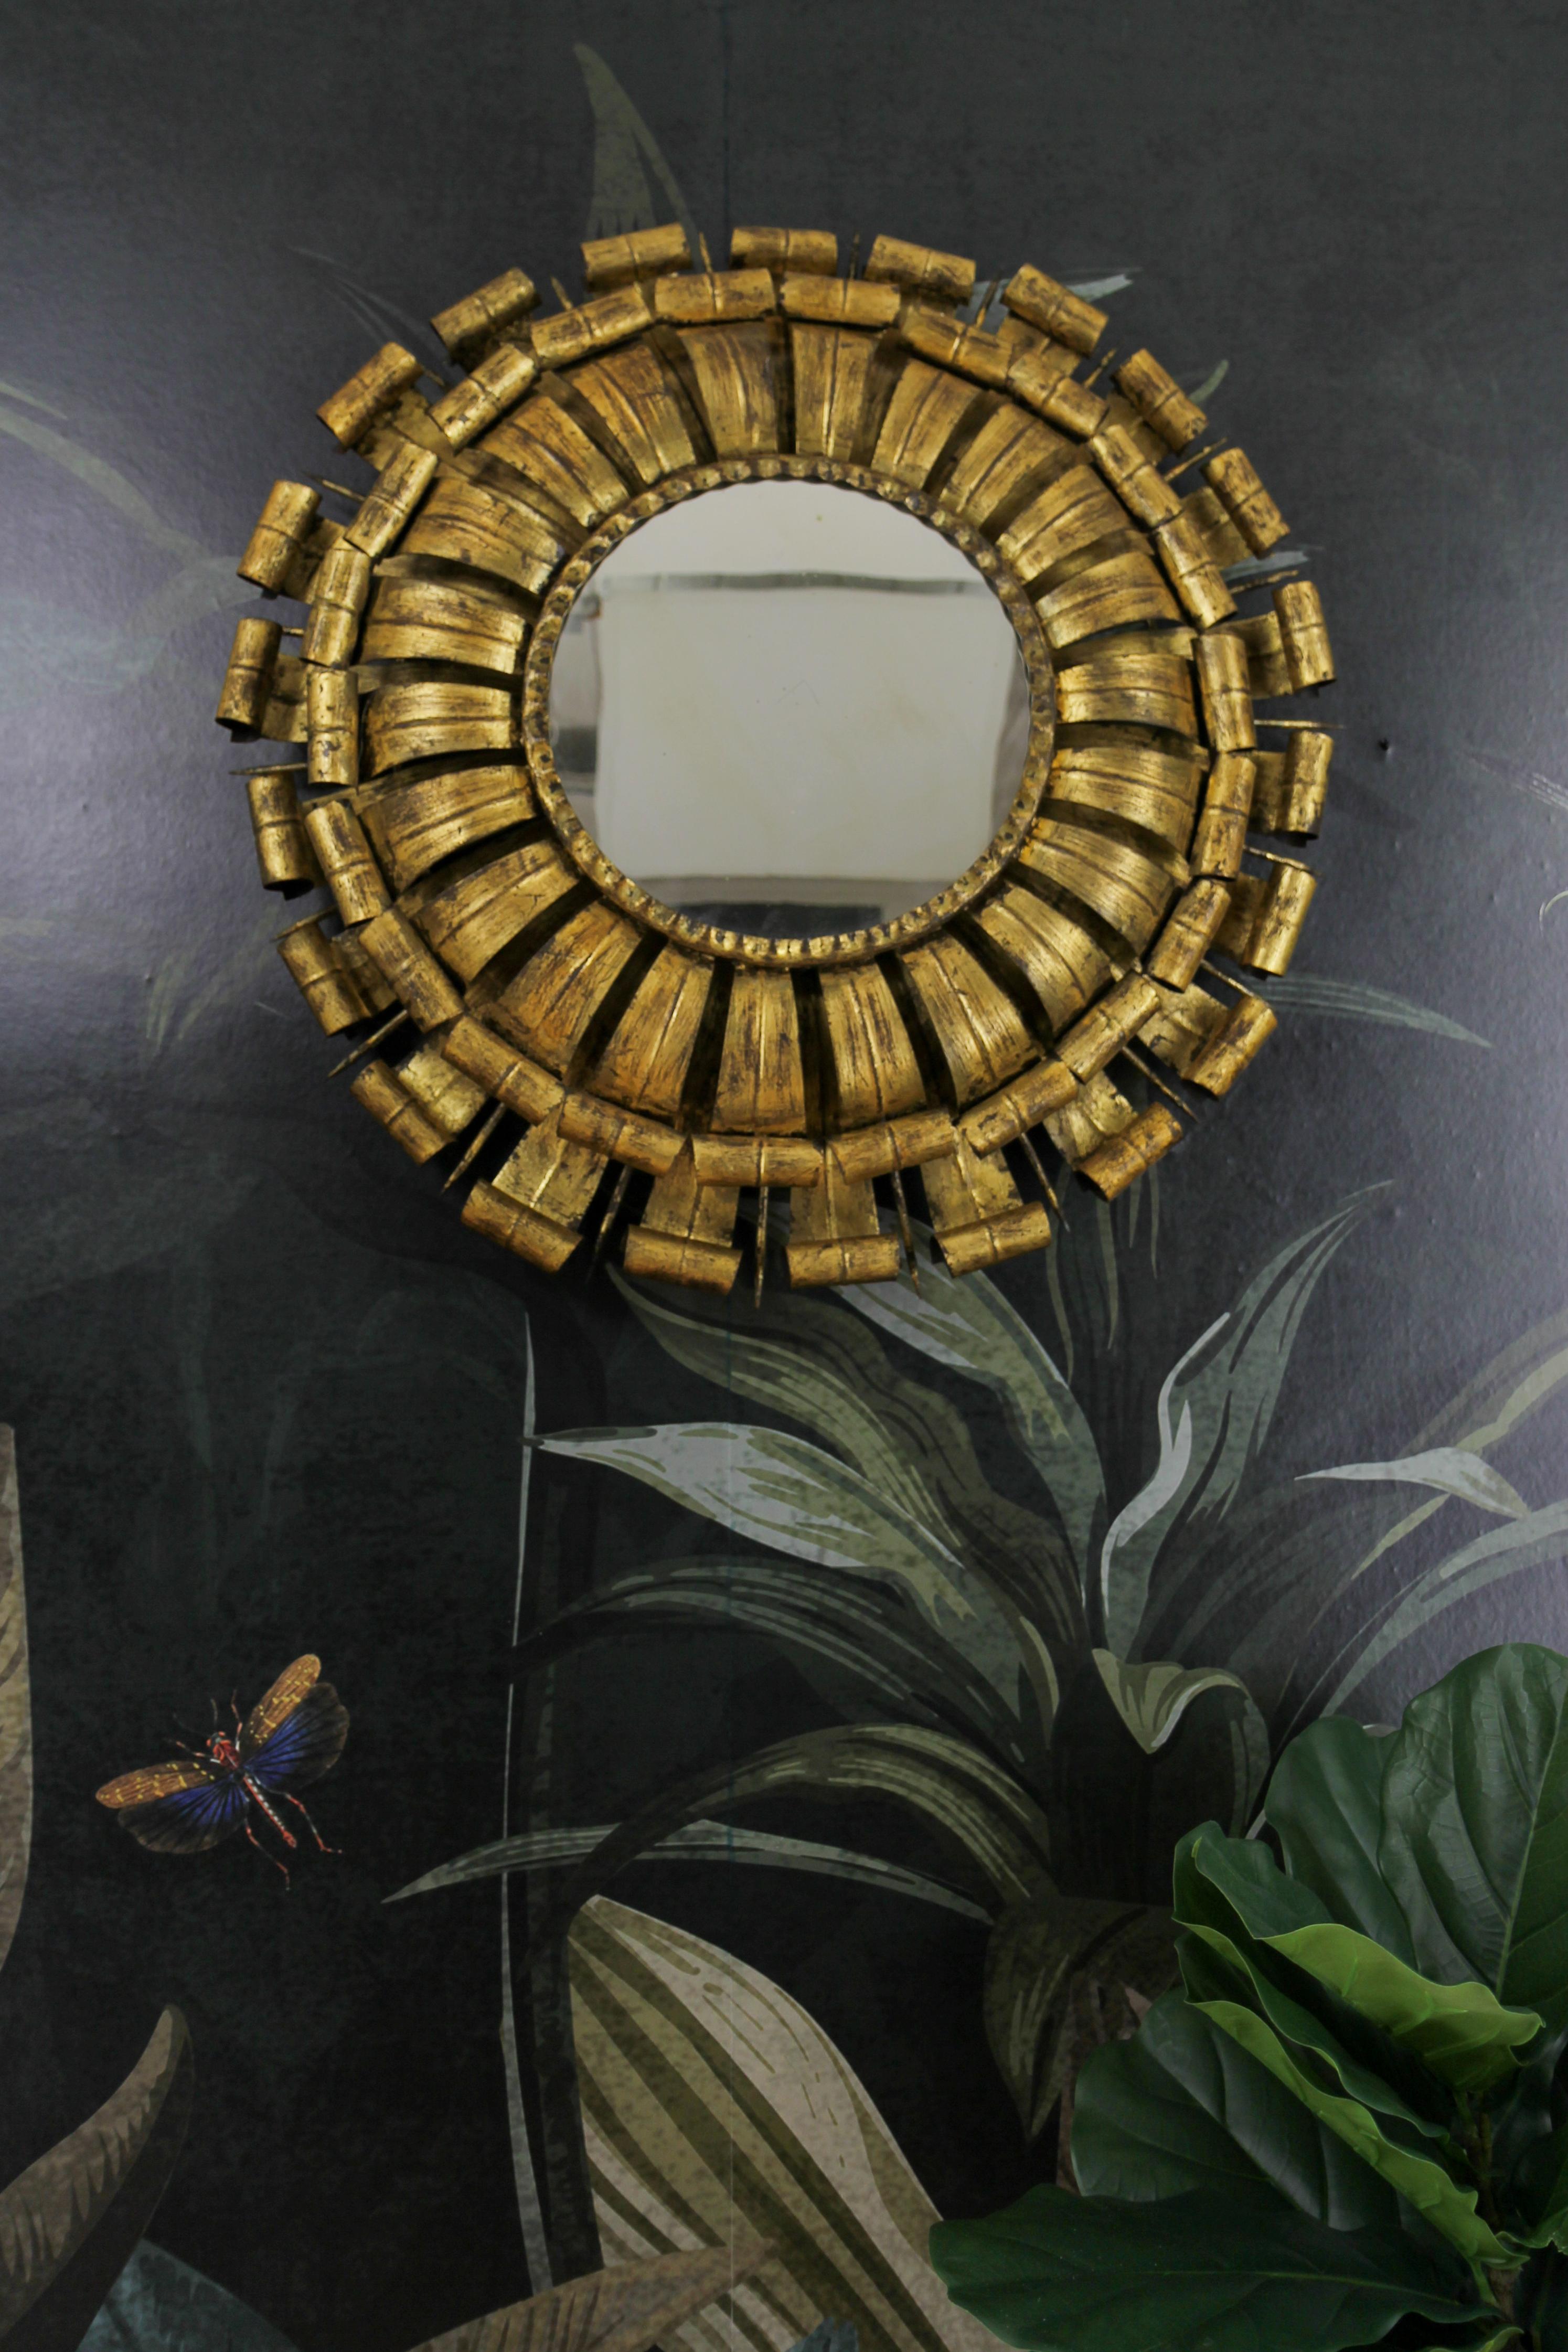 Large sunburst gilt wrought iron wall light with mirror, Spain, circa the 1950s.
This impressive Mid-Century Modern period sun-shaped wall sconce or backlight mirror features a gilt wrought iron two tiers of curved sunburst or eyelash-like motif